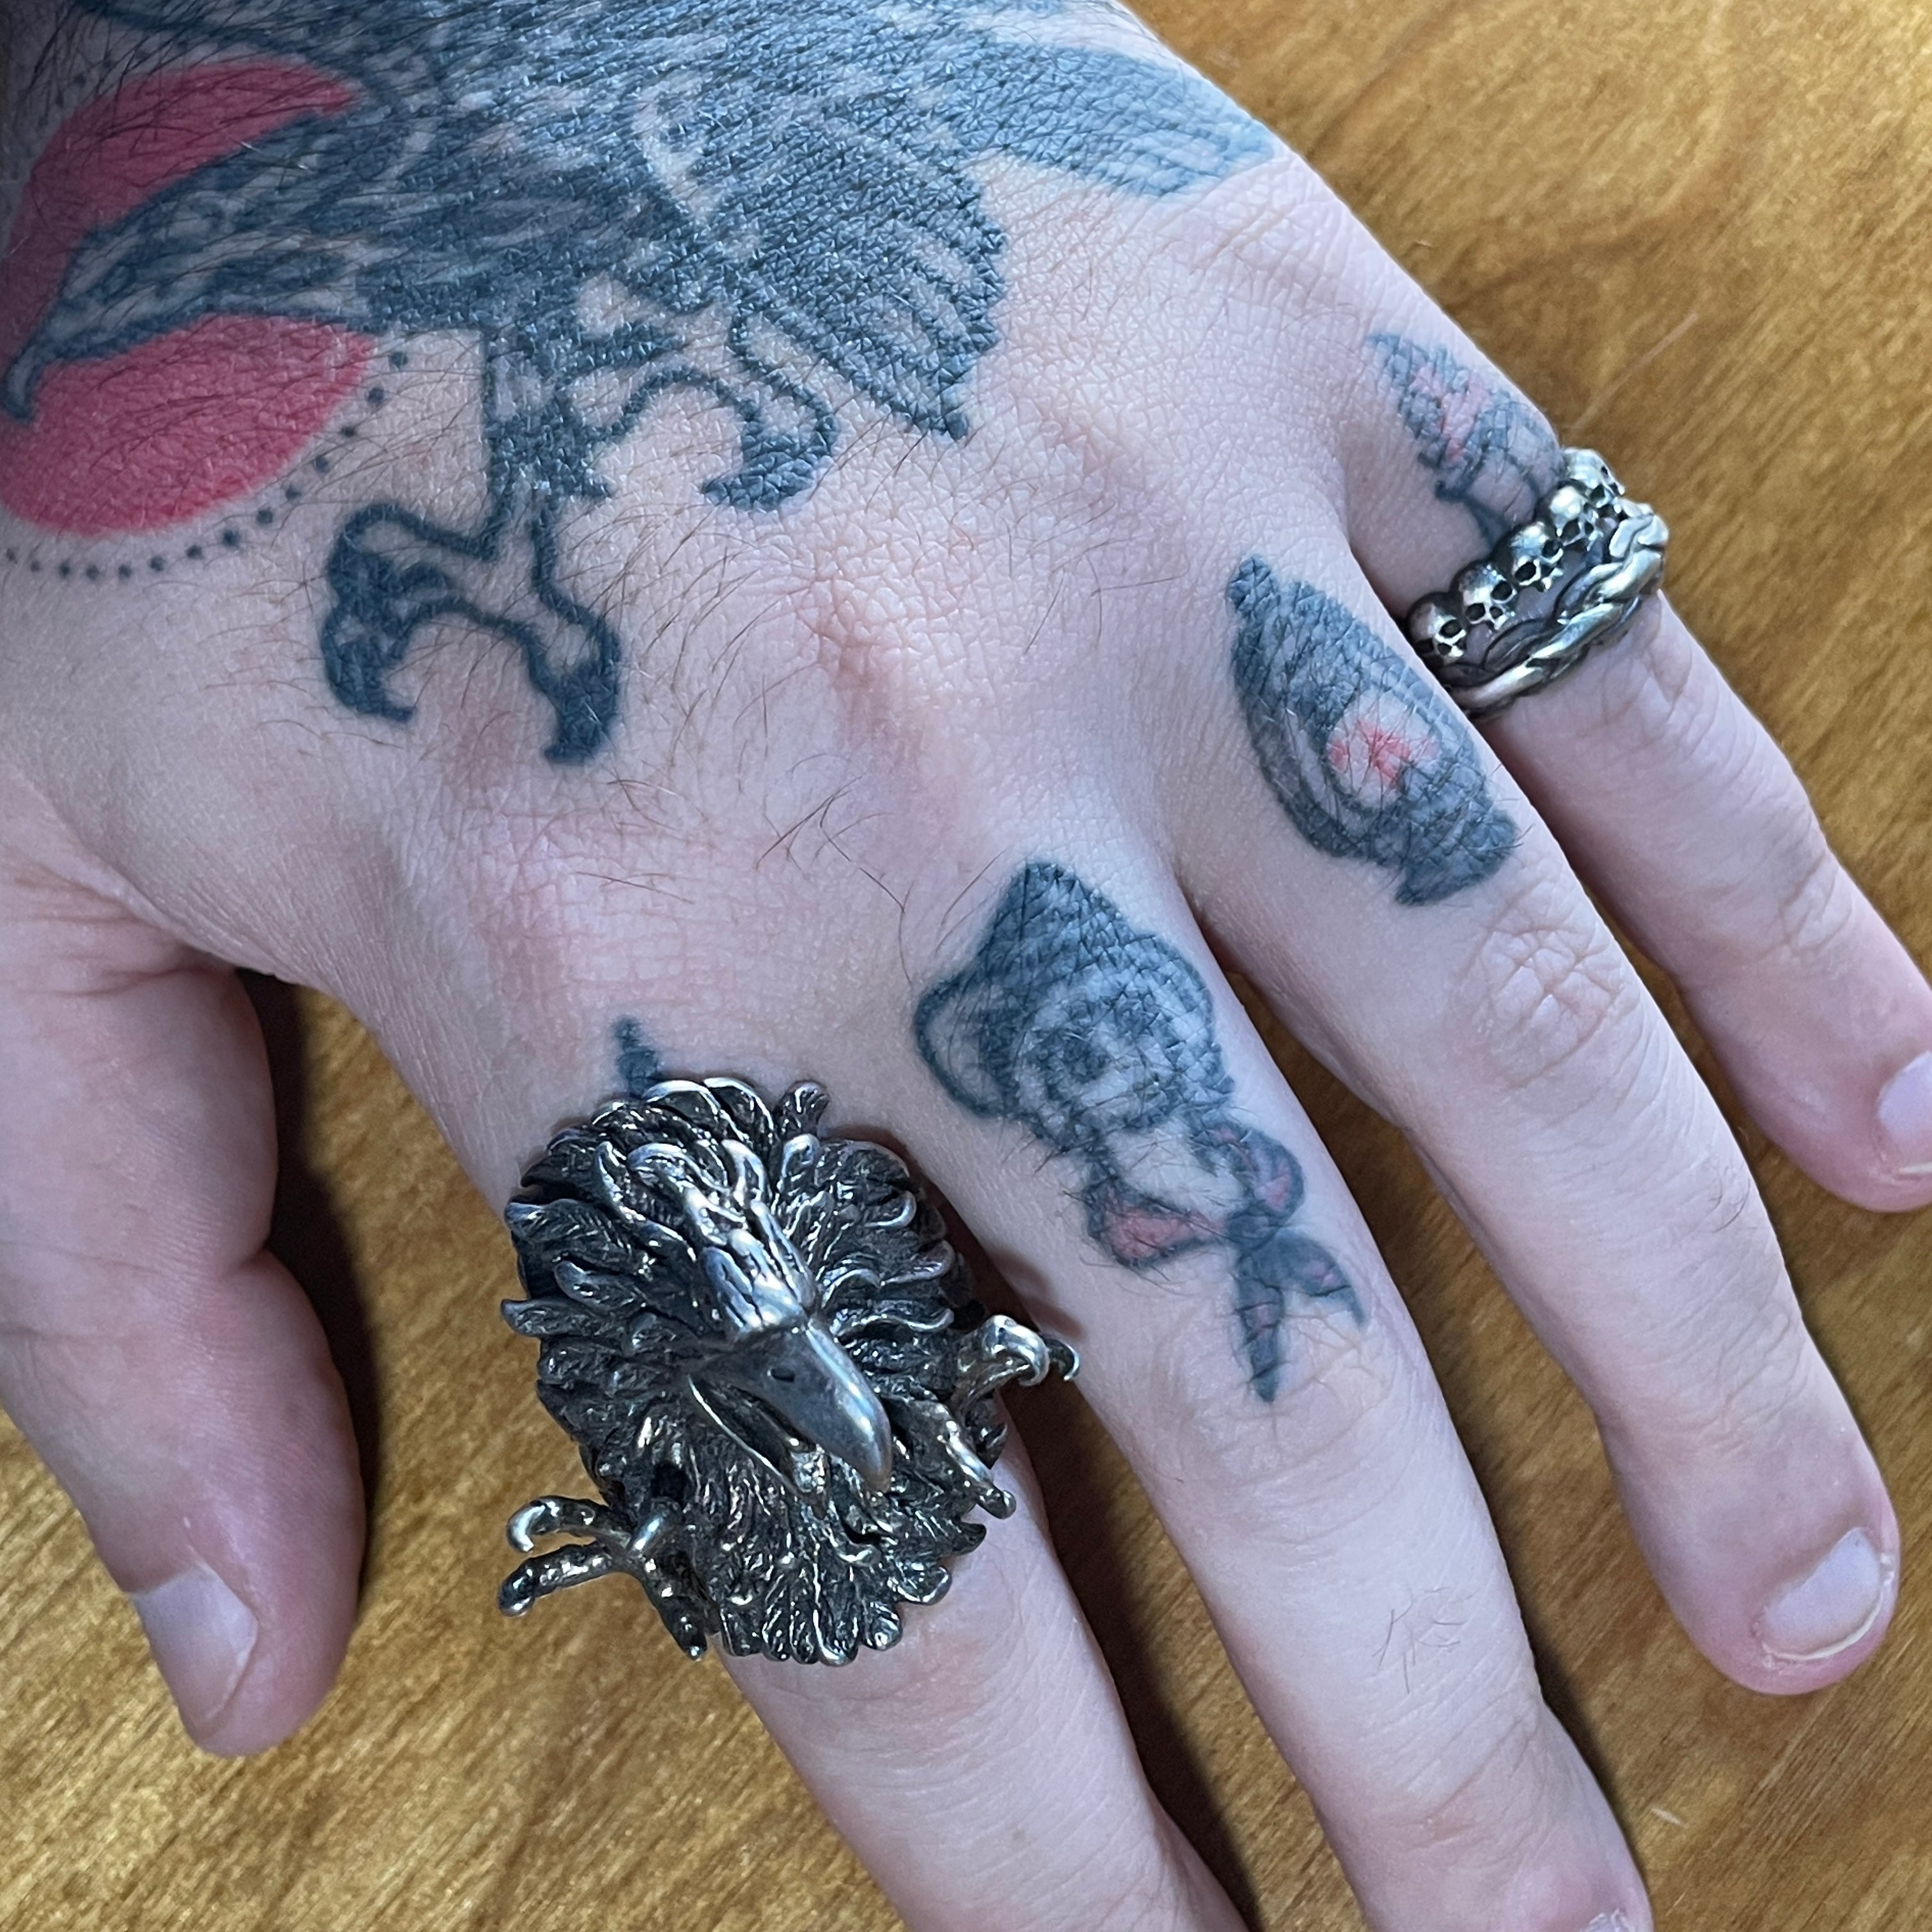 40+ Awesome Finger Tattoos for Men and Women - TattooBlend